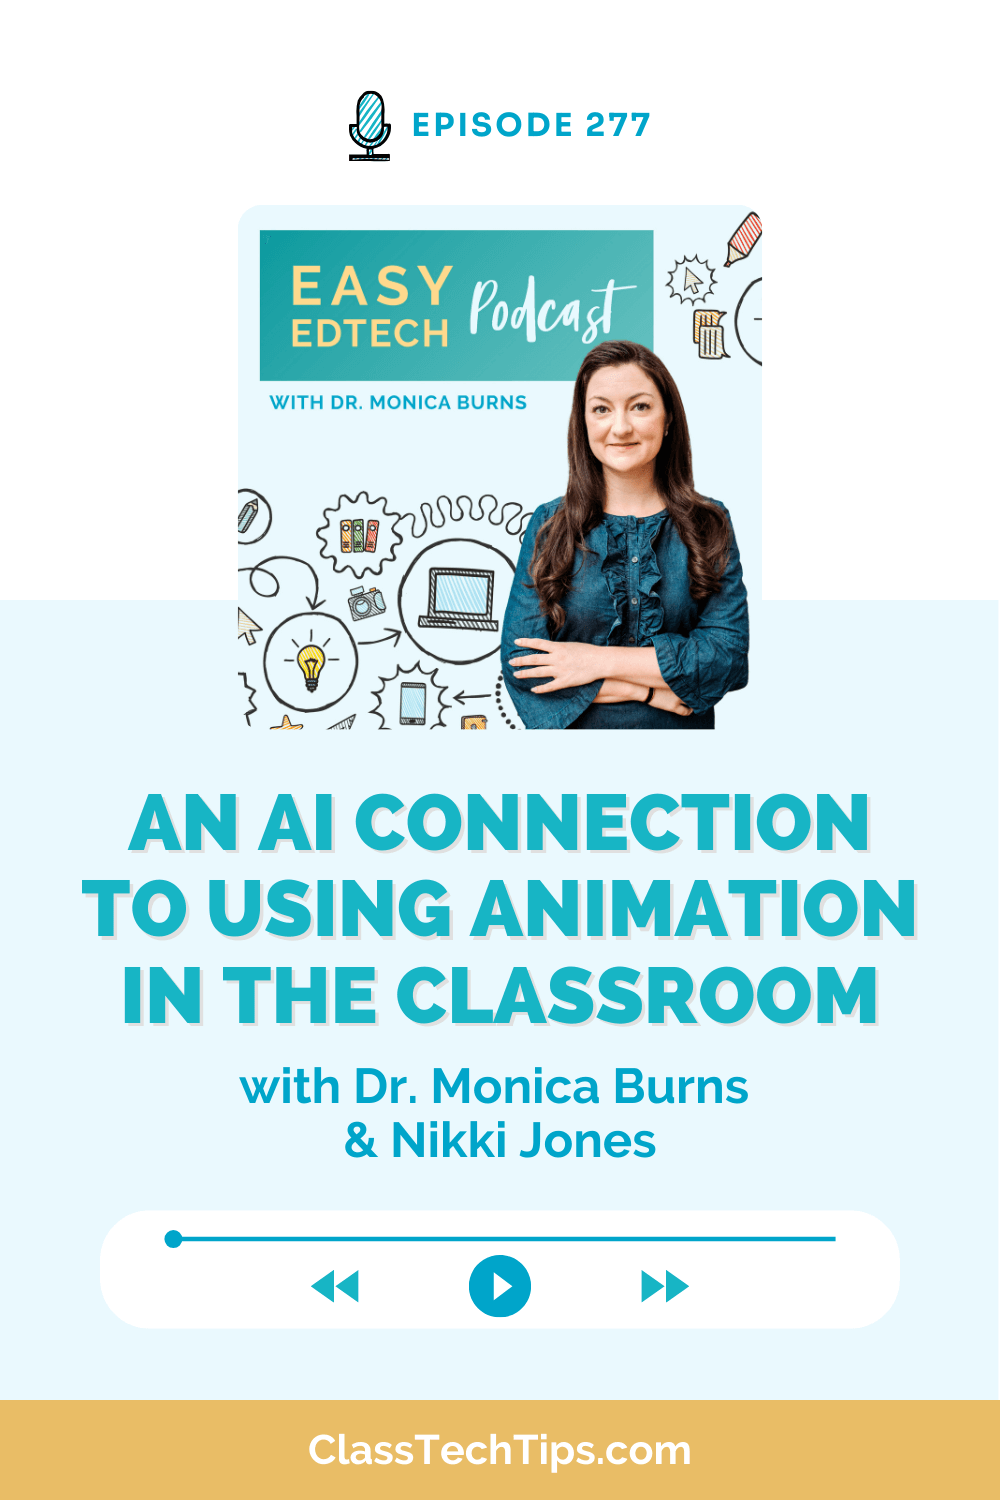 Episode 277 of the Easy EdTech Podcast featuring Dr. Monica Burns and Nikki Jones discussing the benefits of animation in the classroom to enhance student engagement, creativity, and assessment using AI tools.